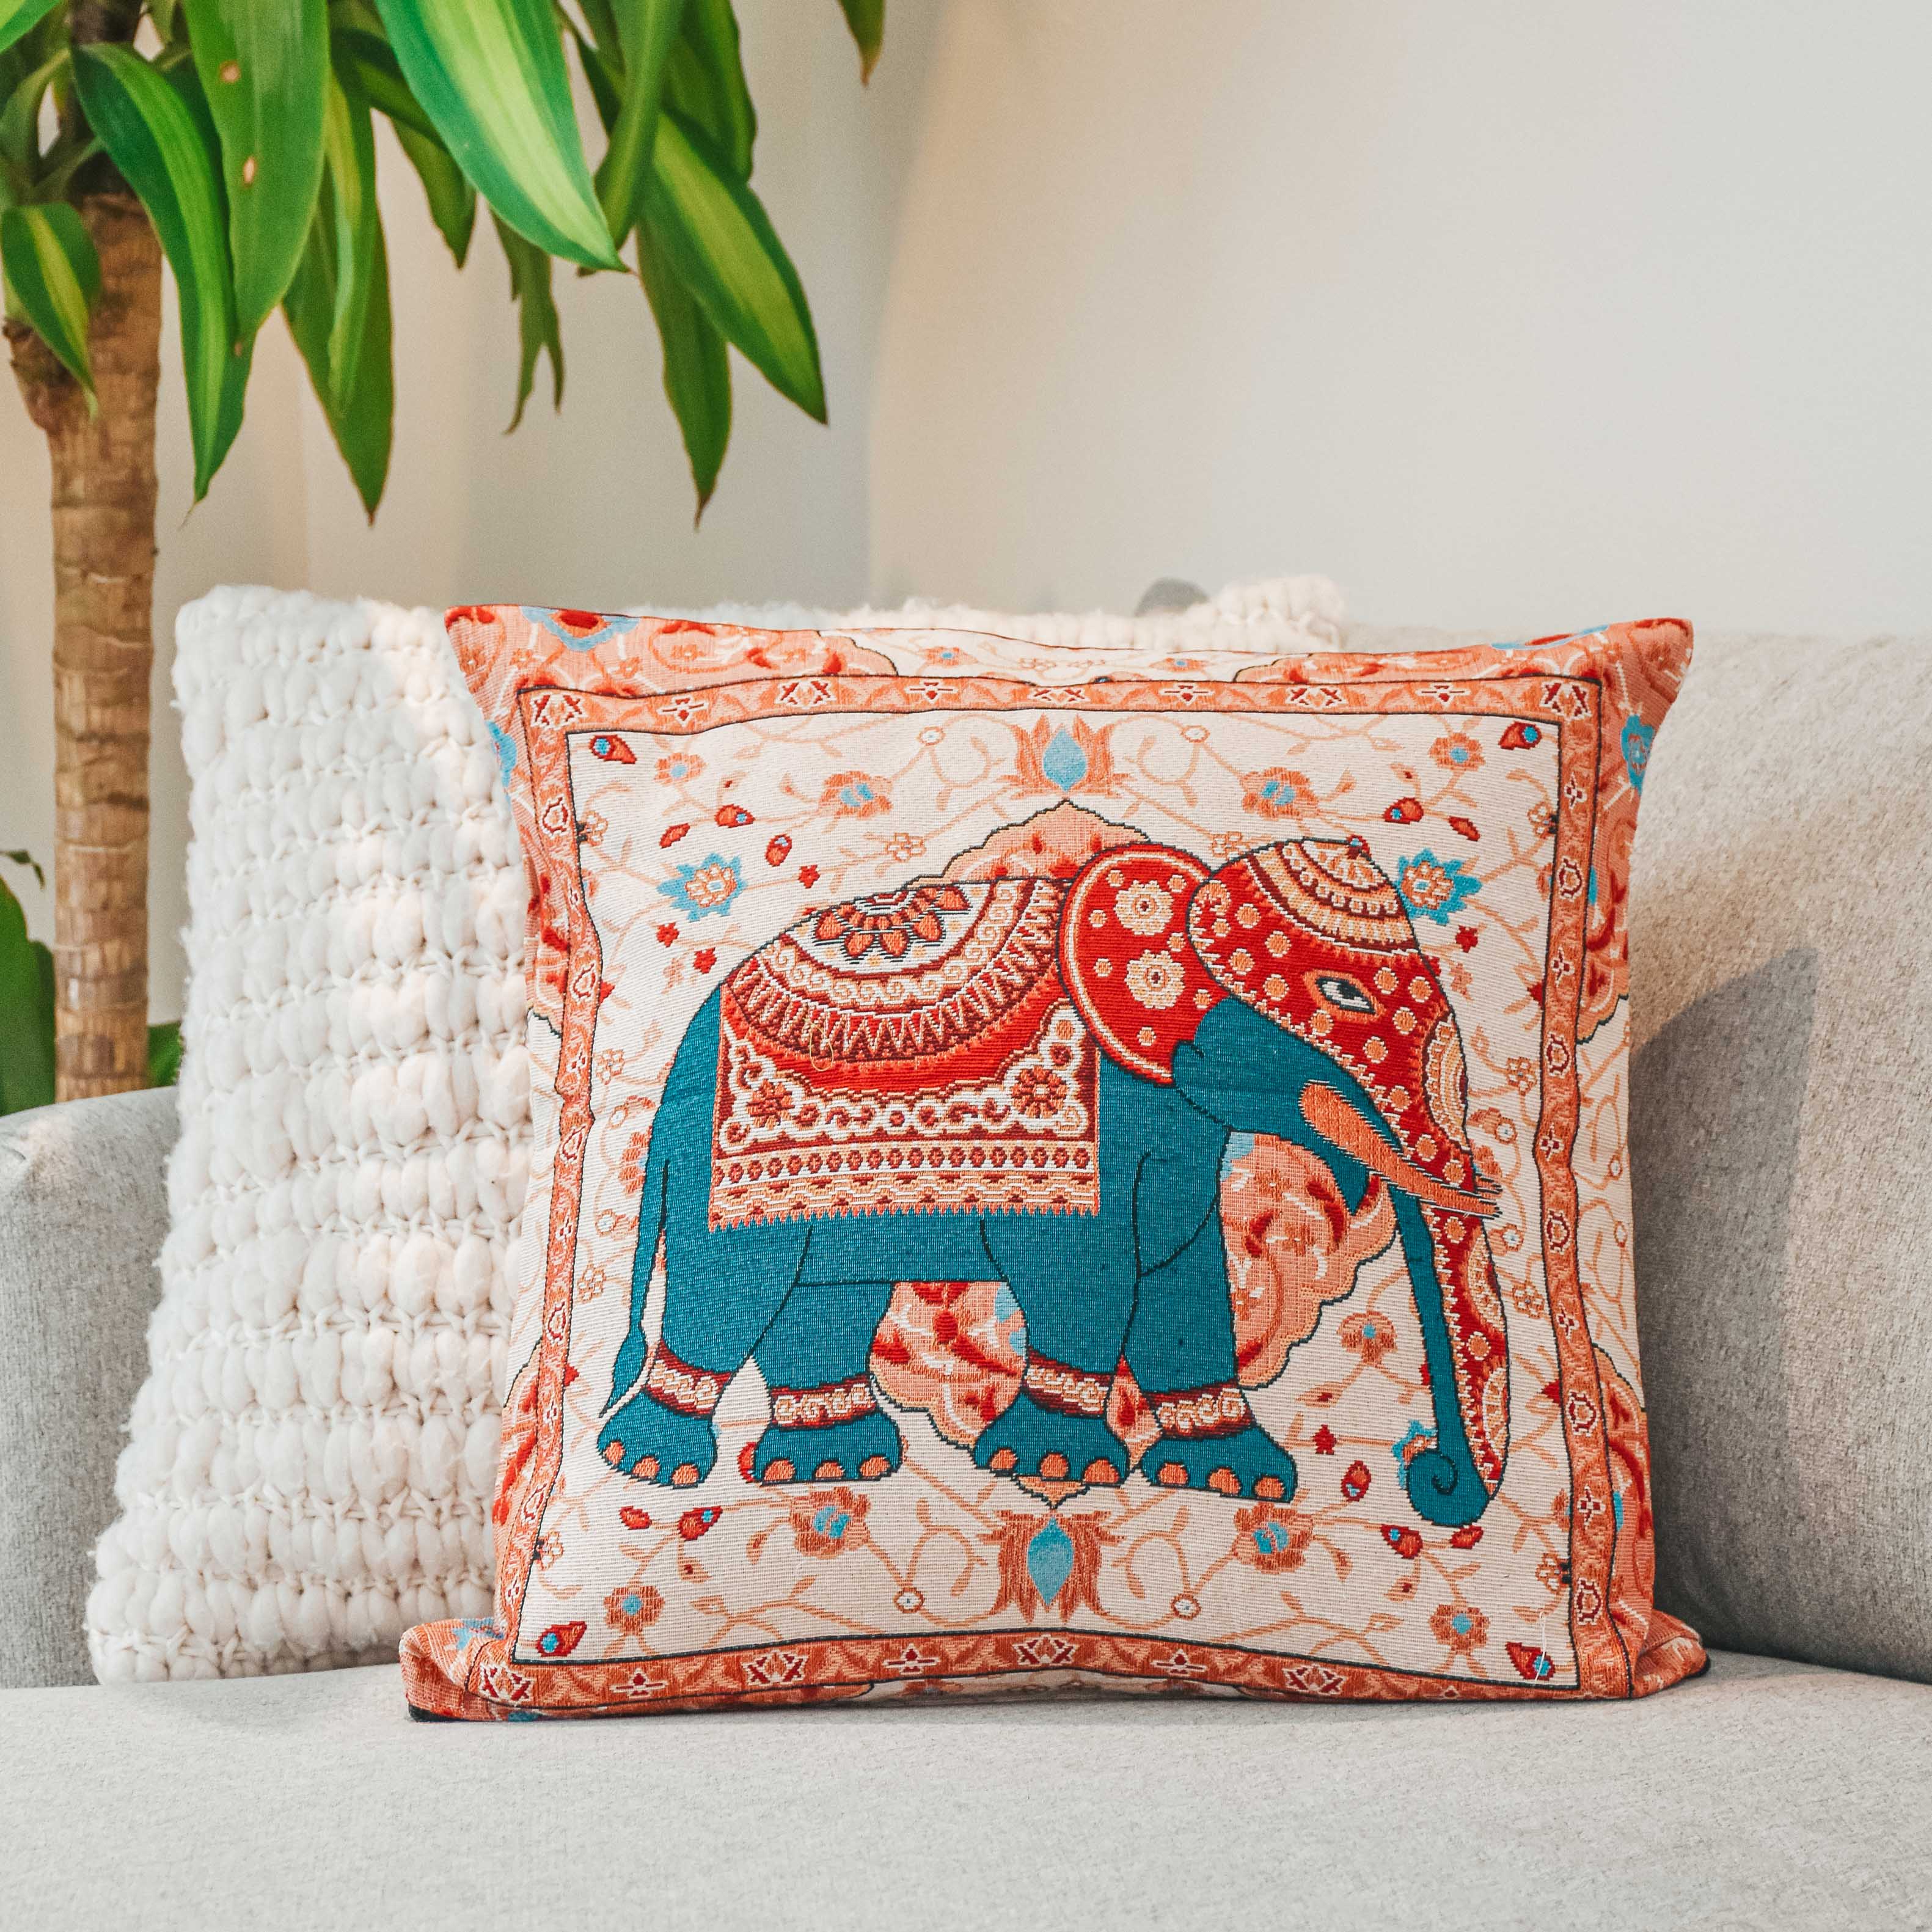 SELVA PILLOW COVER Elepanta Pillows - Buy Today Elephant Pants Jewelry And Bohemian Clothes Handmade In Thailand Help To Save The Elephants FairTrade And Vegan